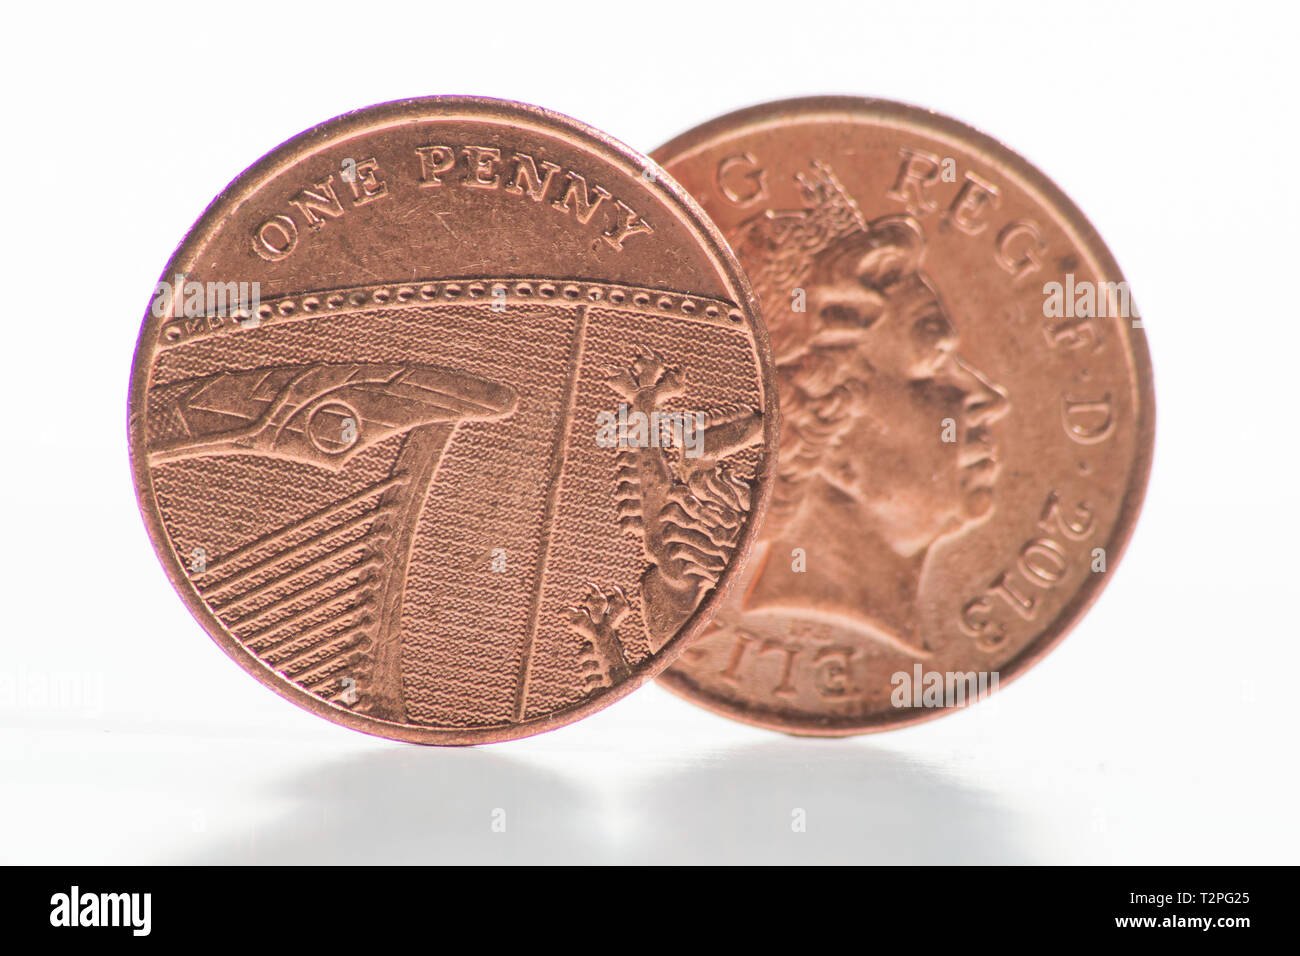 Coins. The One Pence Piece.  This is the smallest denomination in the Sterling currency. Stock Photo